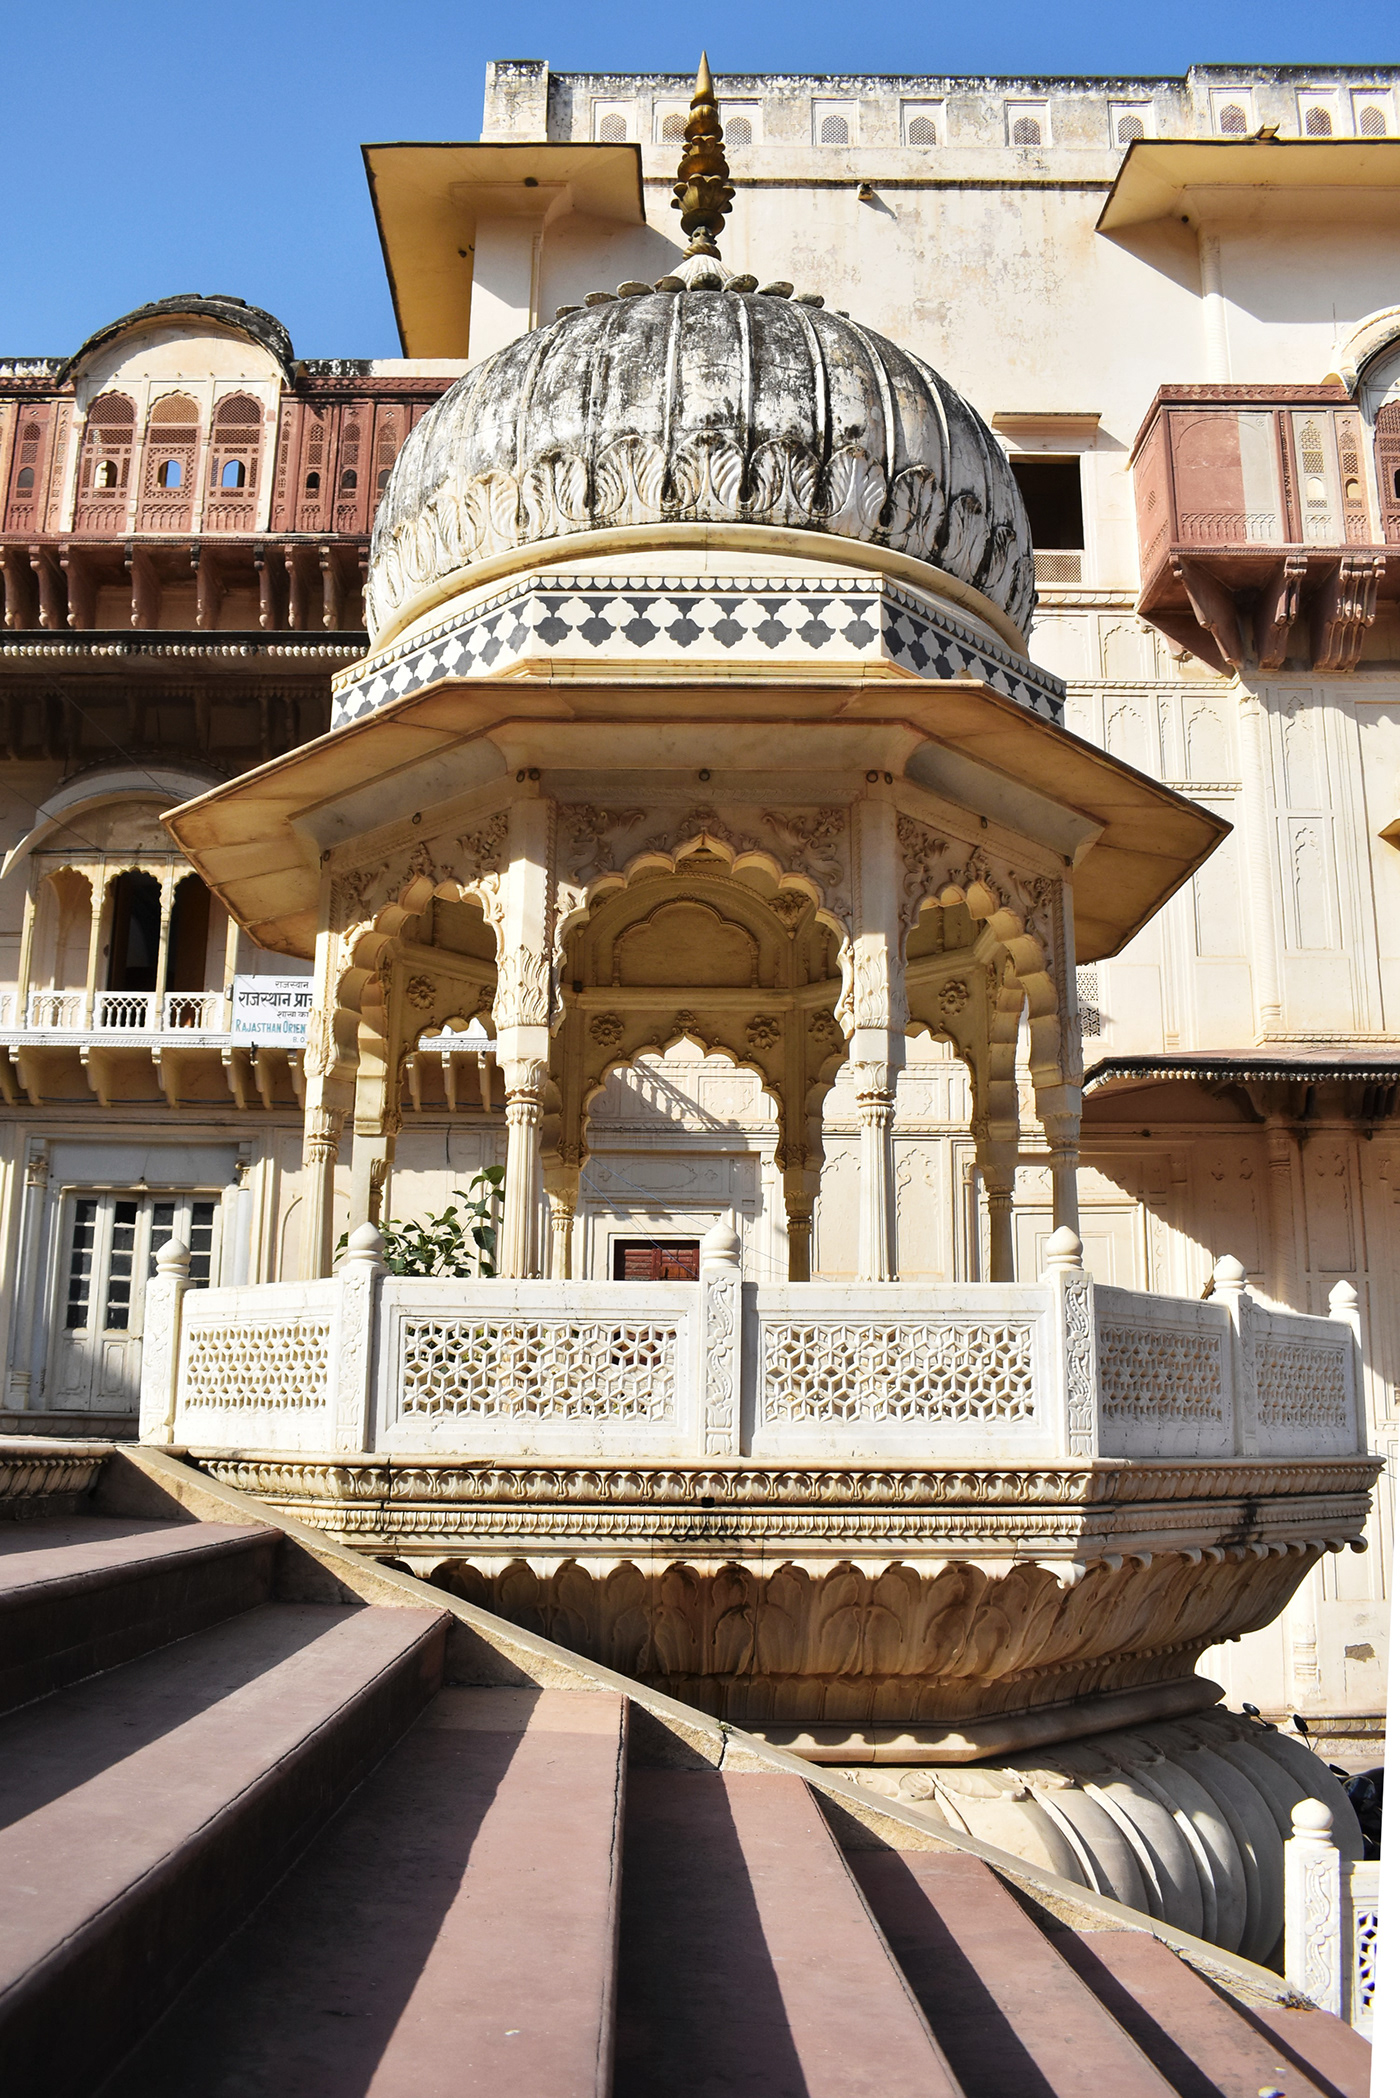 #architecture #art #Design #digitalphotography #heritage  #incredible india #India #modern   #photography #Rajasthan